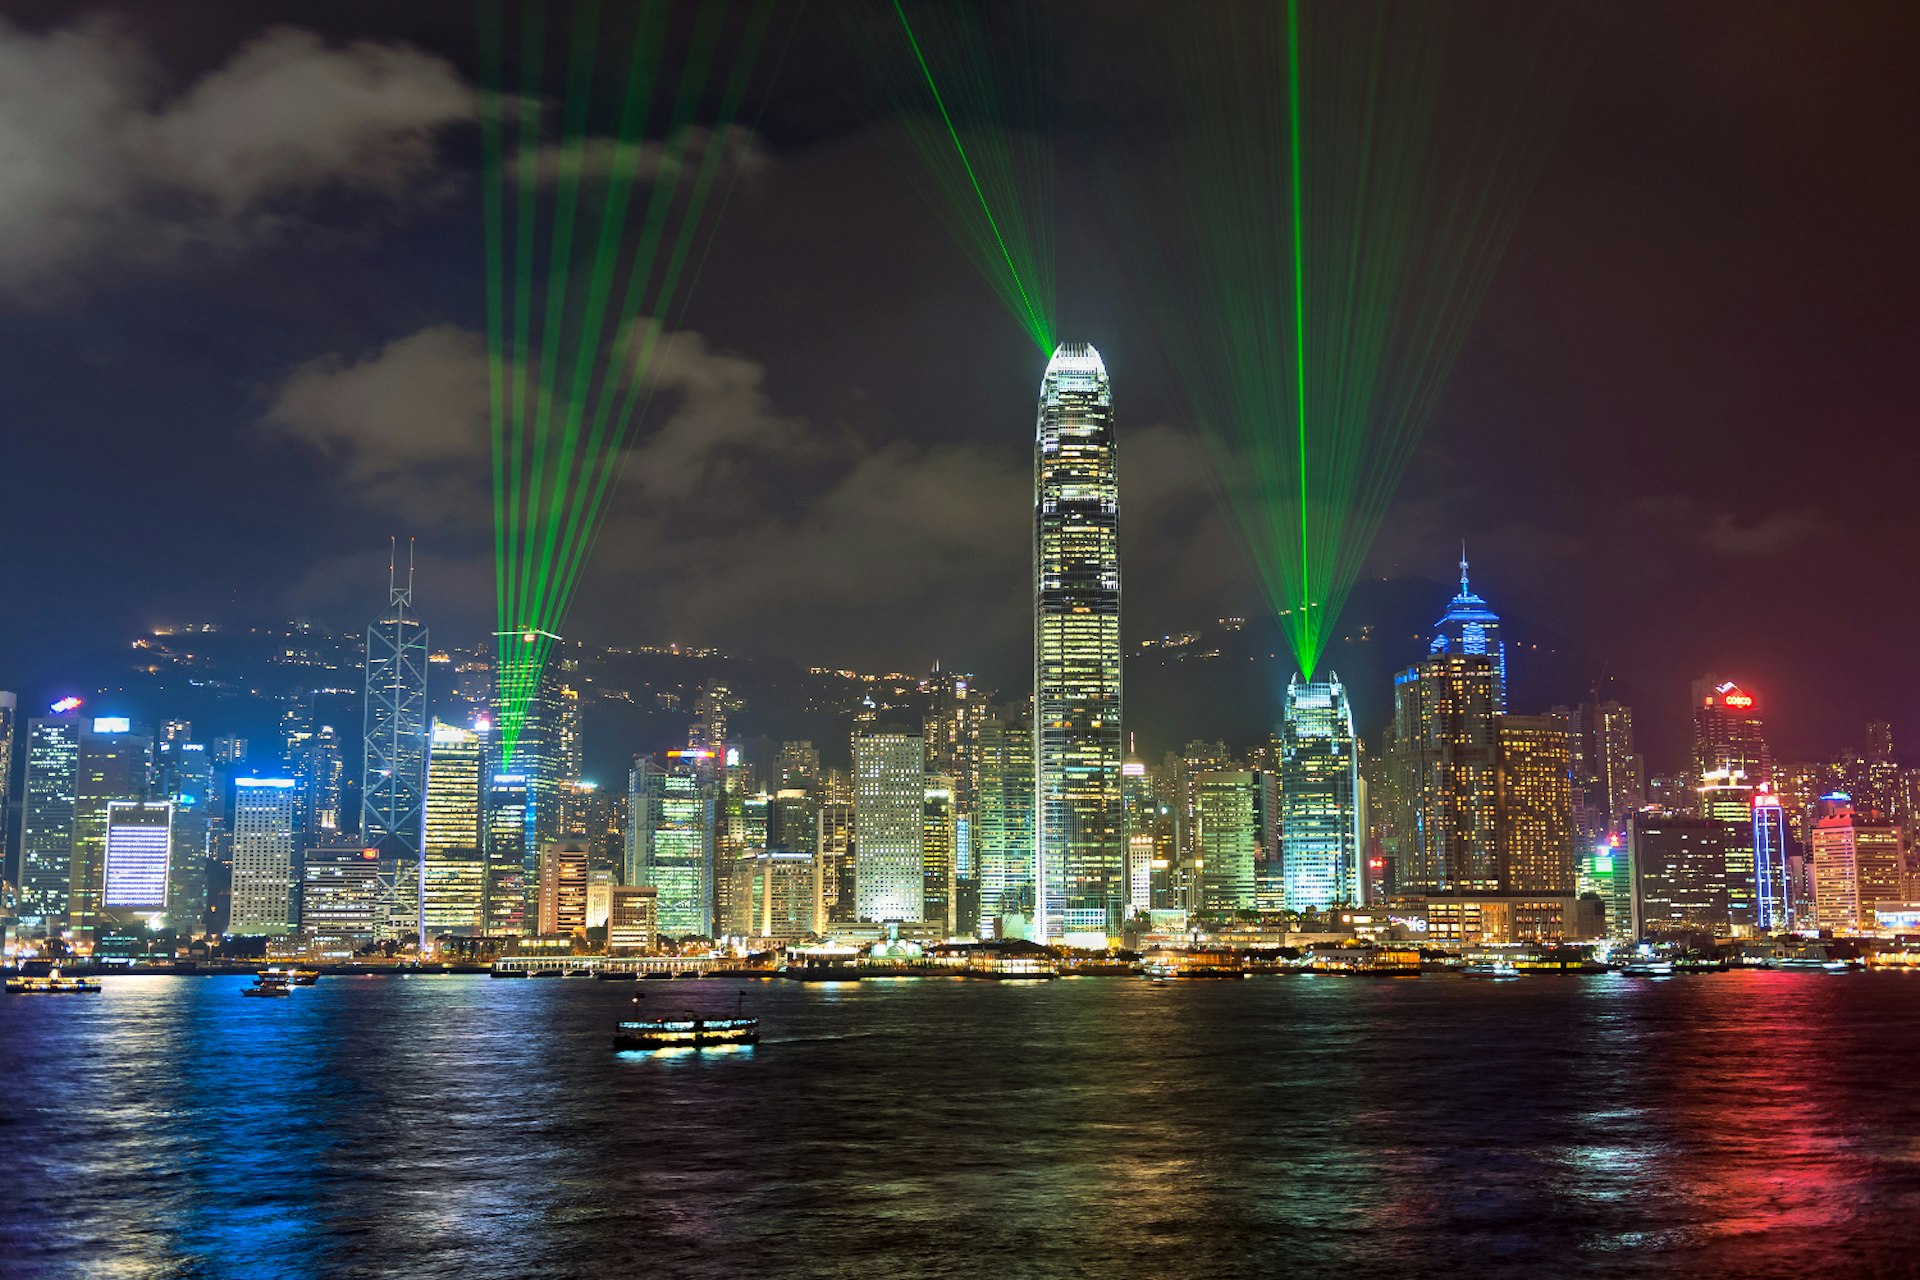 Best views of the Symphony of Lights are from Tsim Sha Tsui promenade. Image by Pavliha / Getty